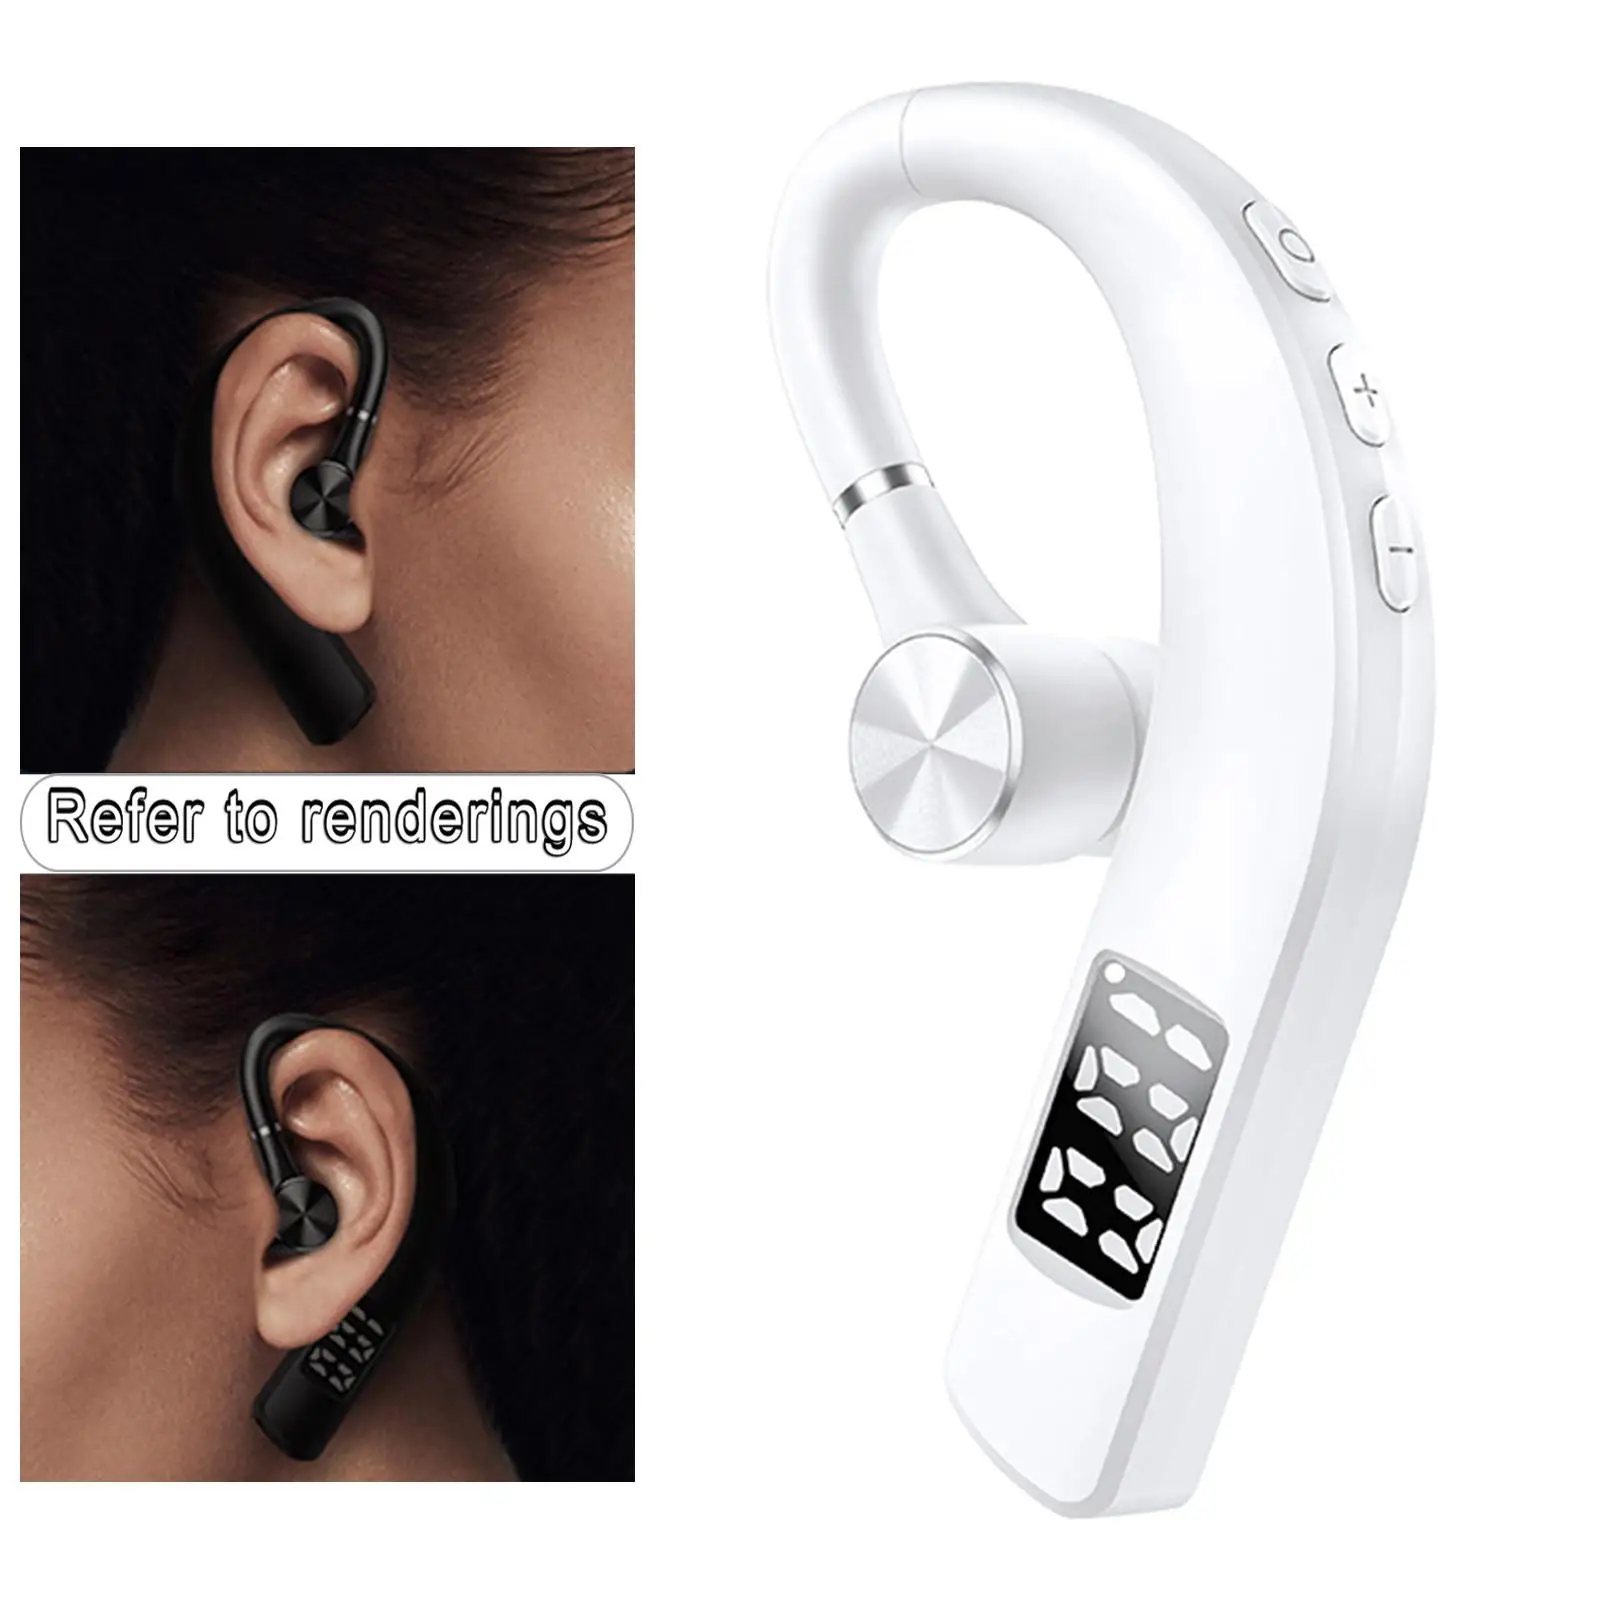 Bluetooth Headset Ear Hook Built-In HD Microphone HD Calling for Business